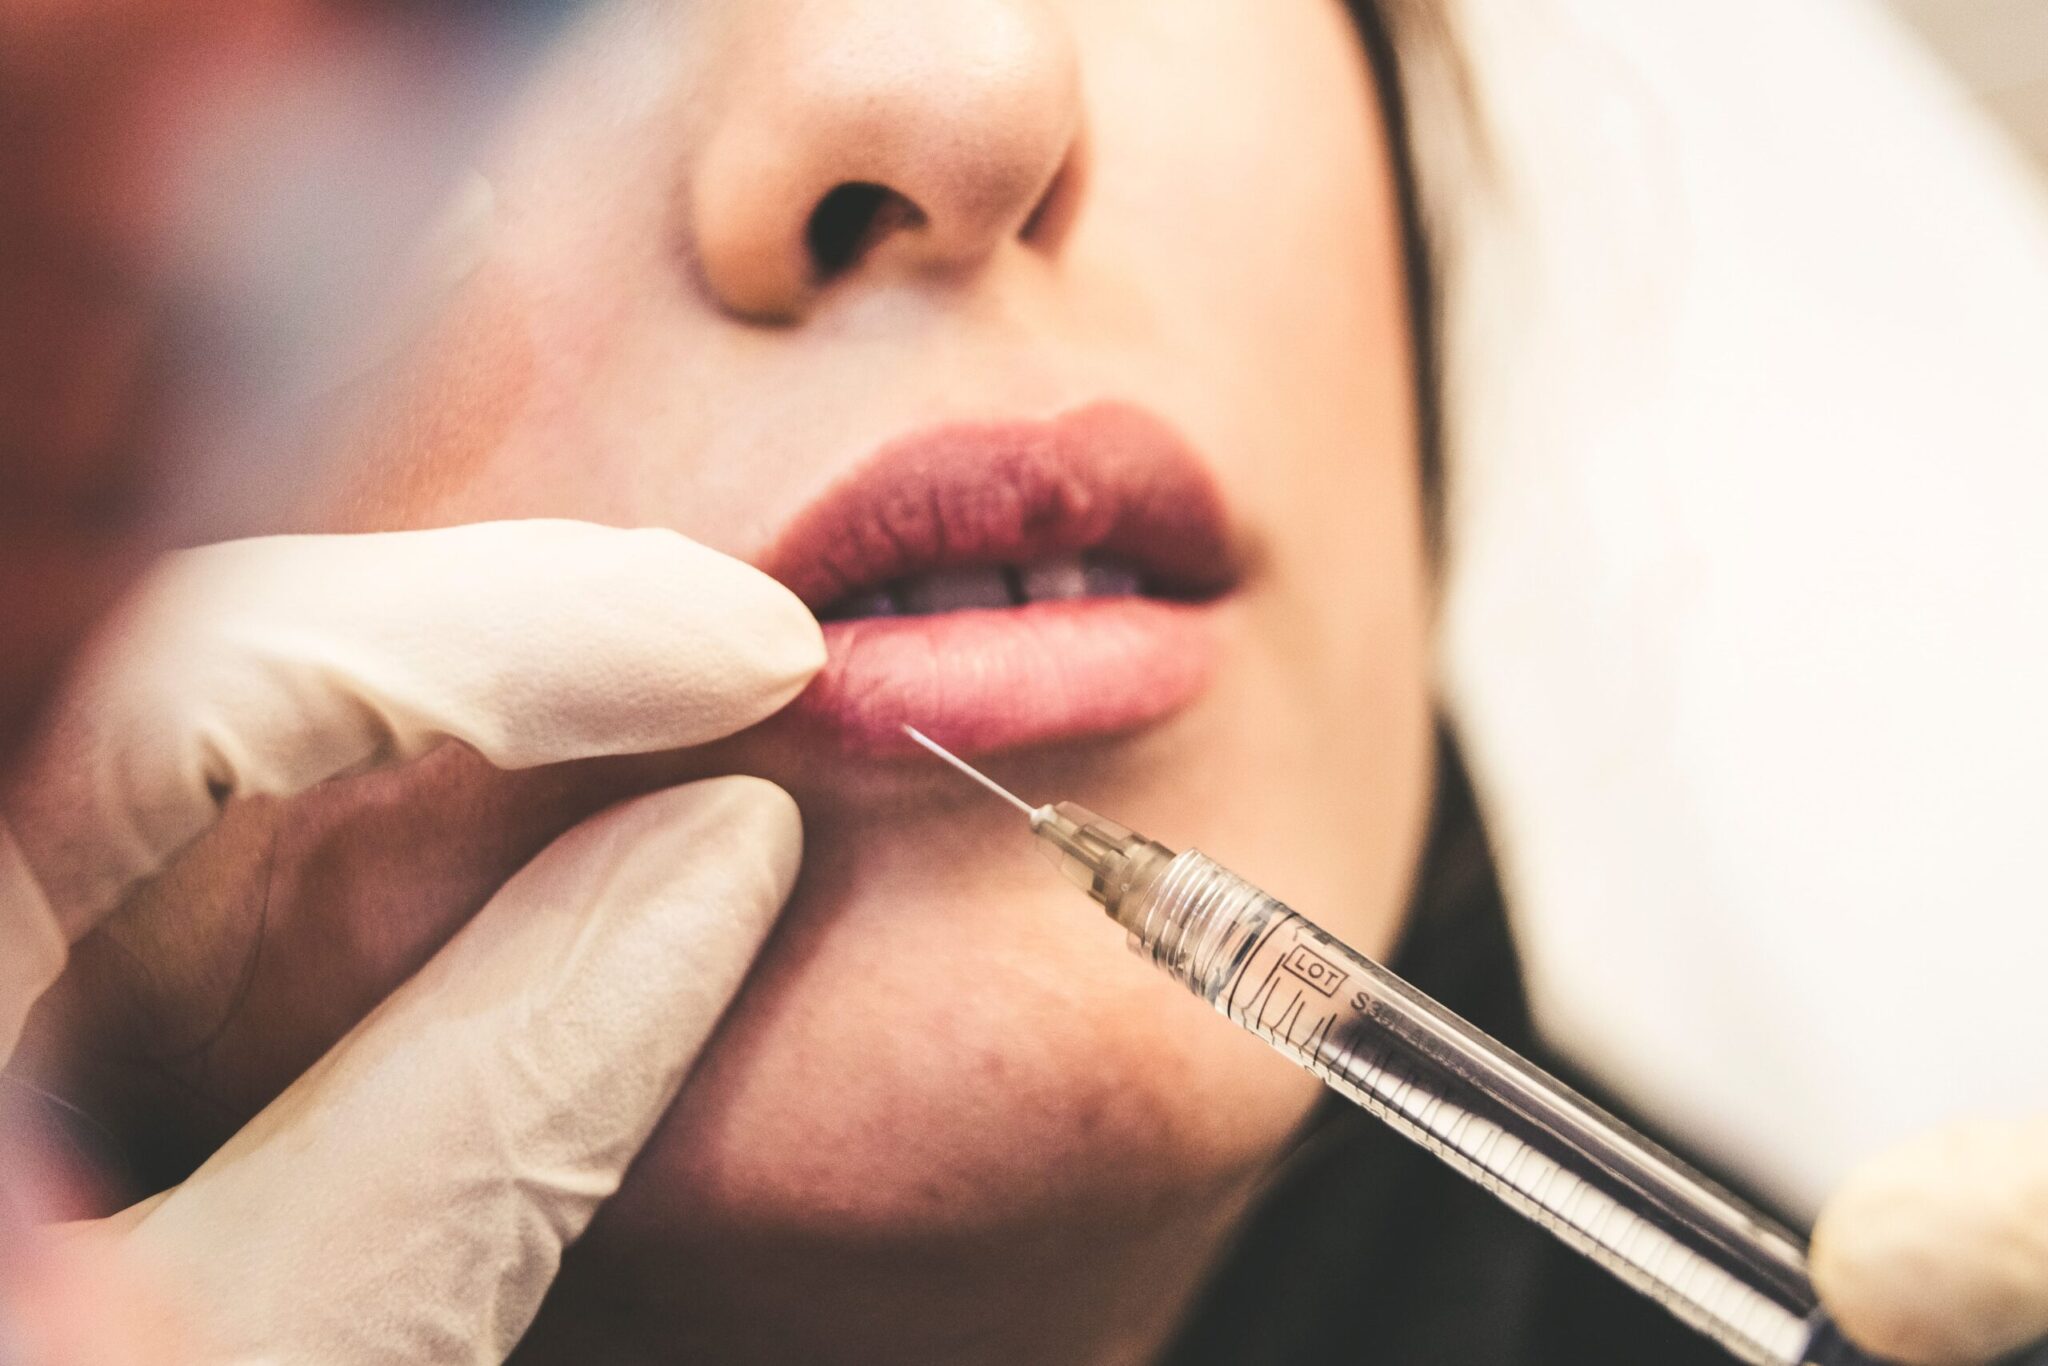 cosmetic surgery negligence in florida and law firm